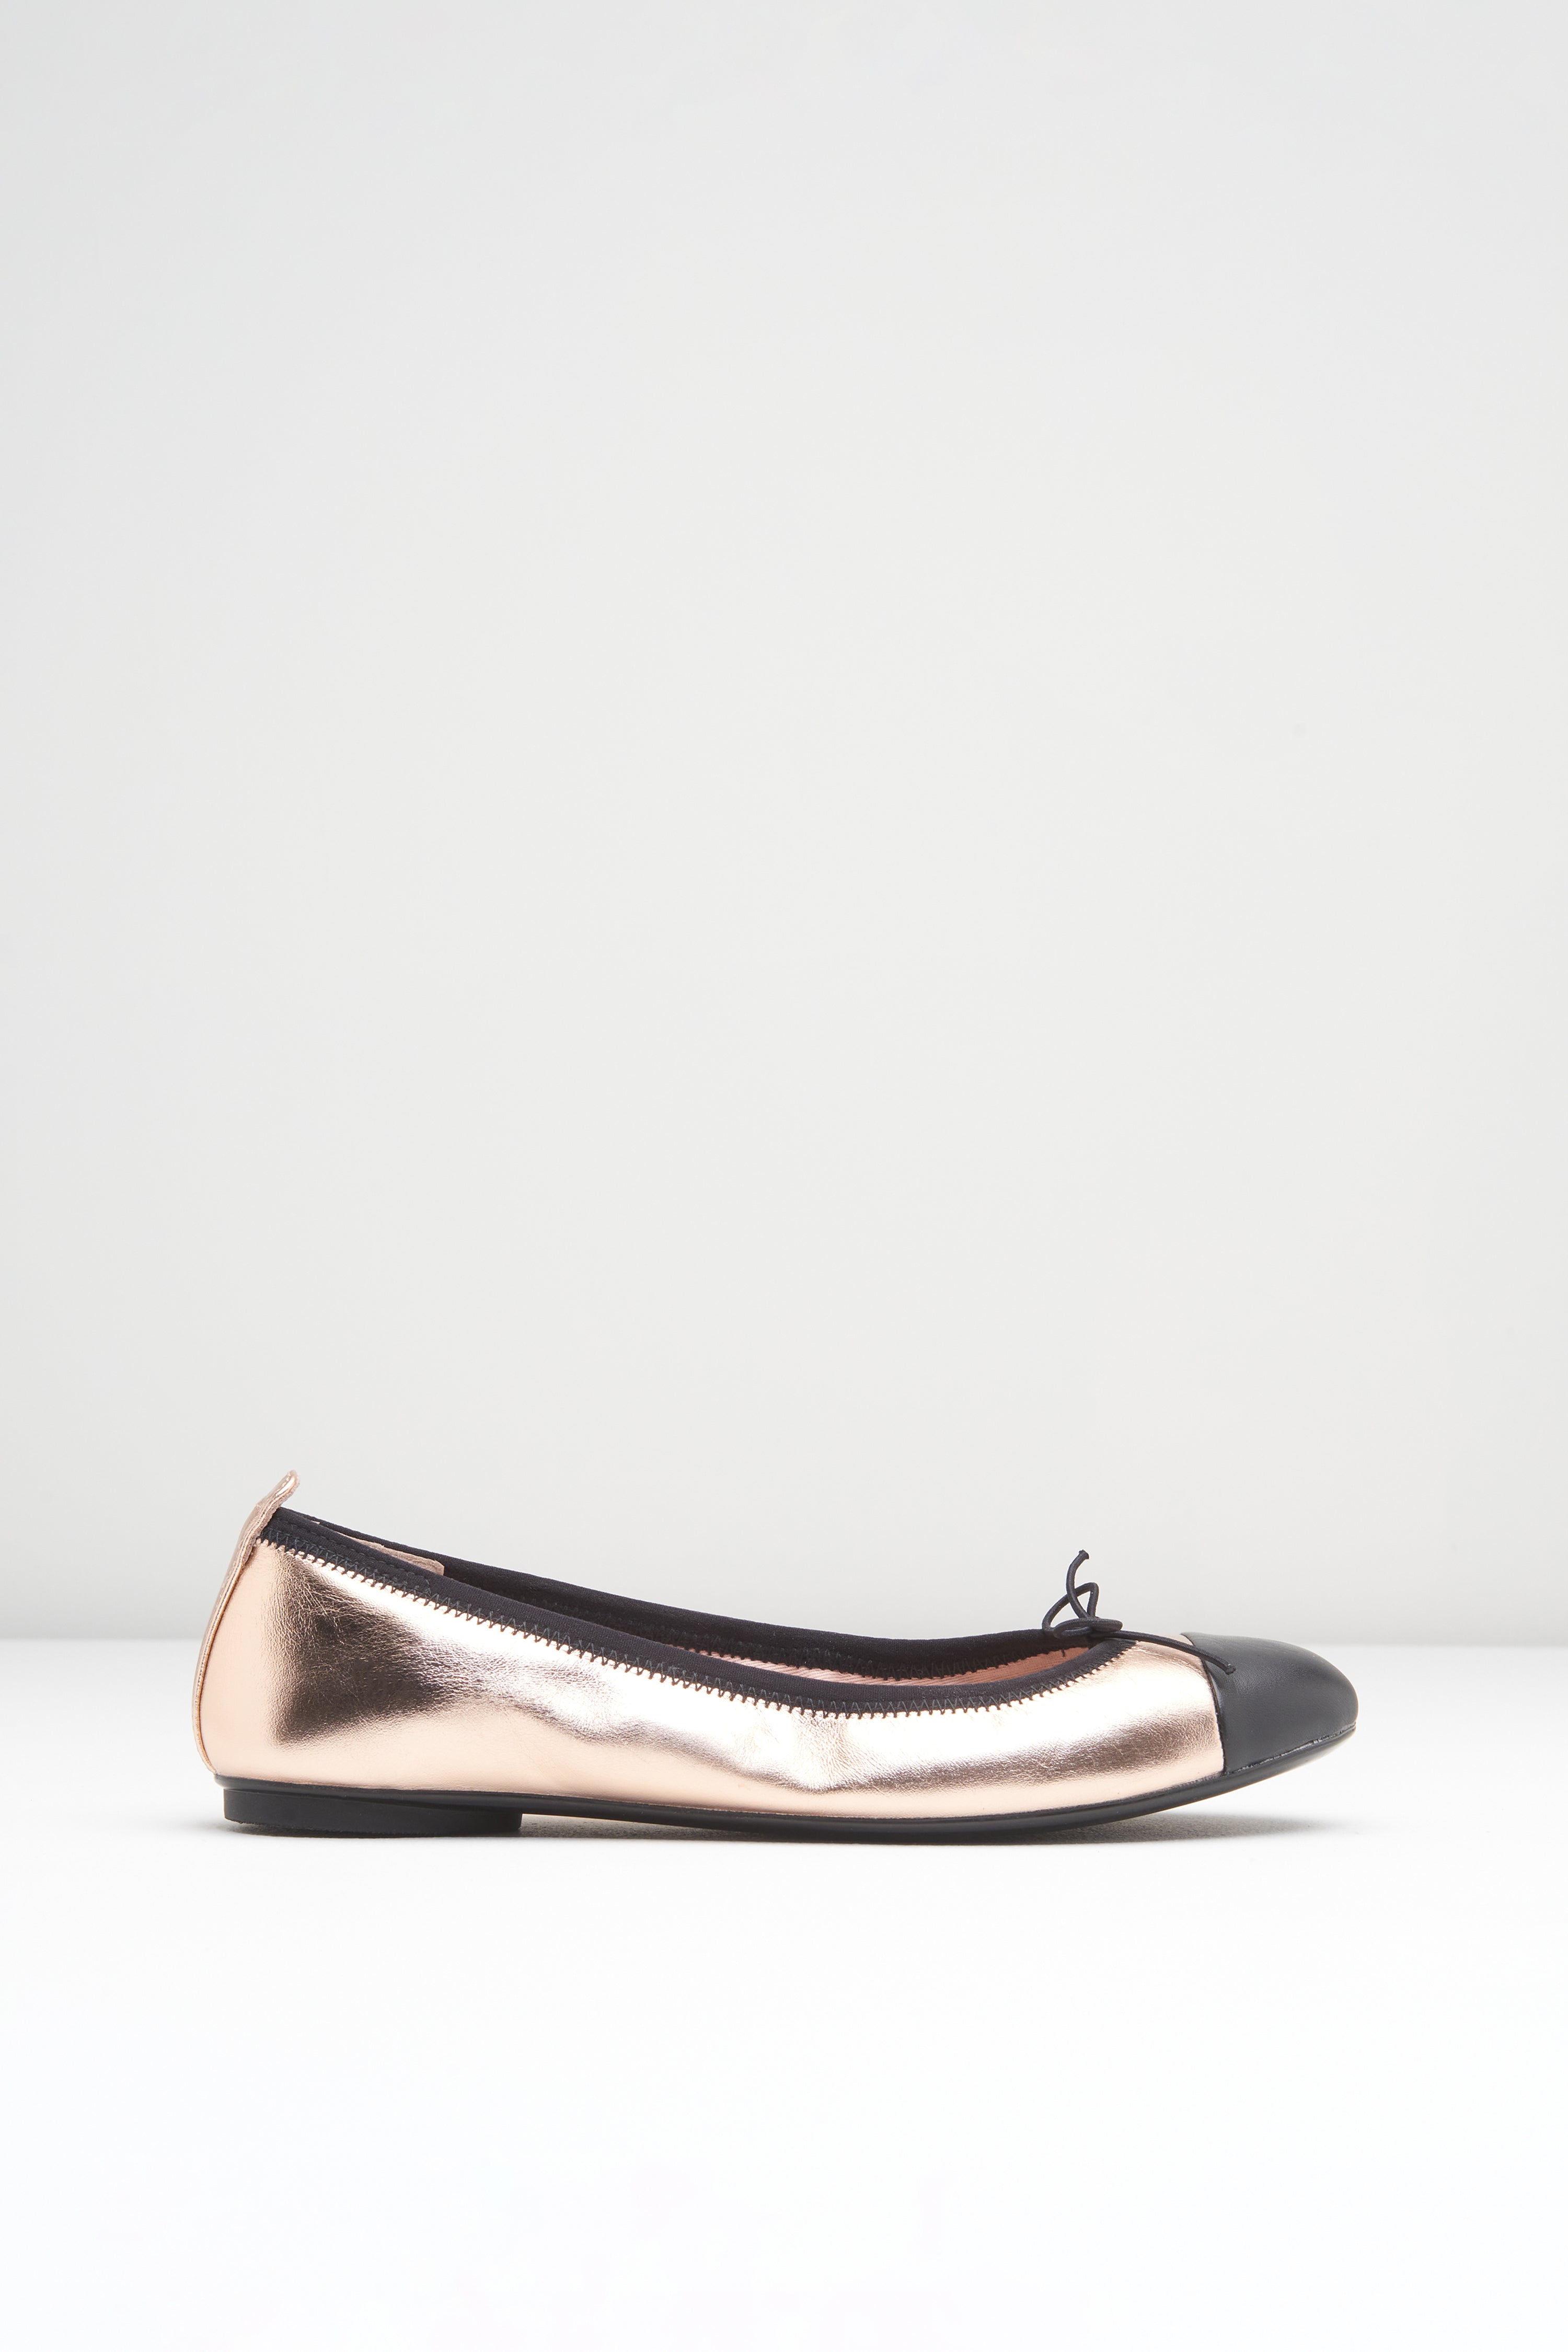 BLOCH Ladies Chara Ballet Pumps, Rame Leather